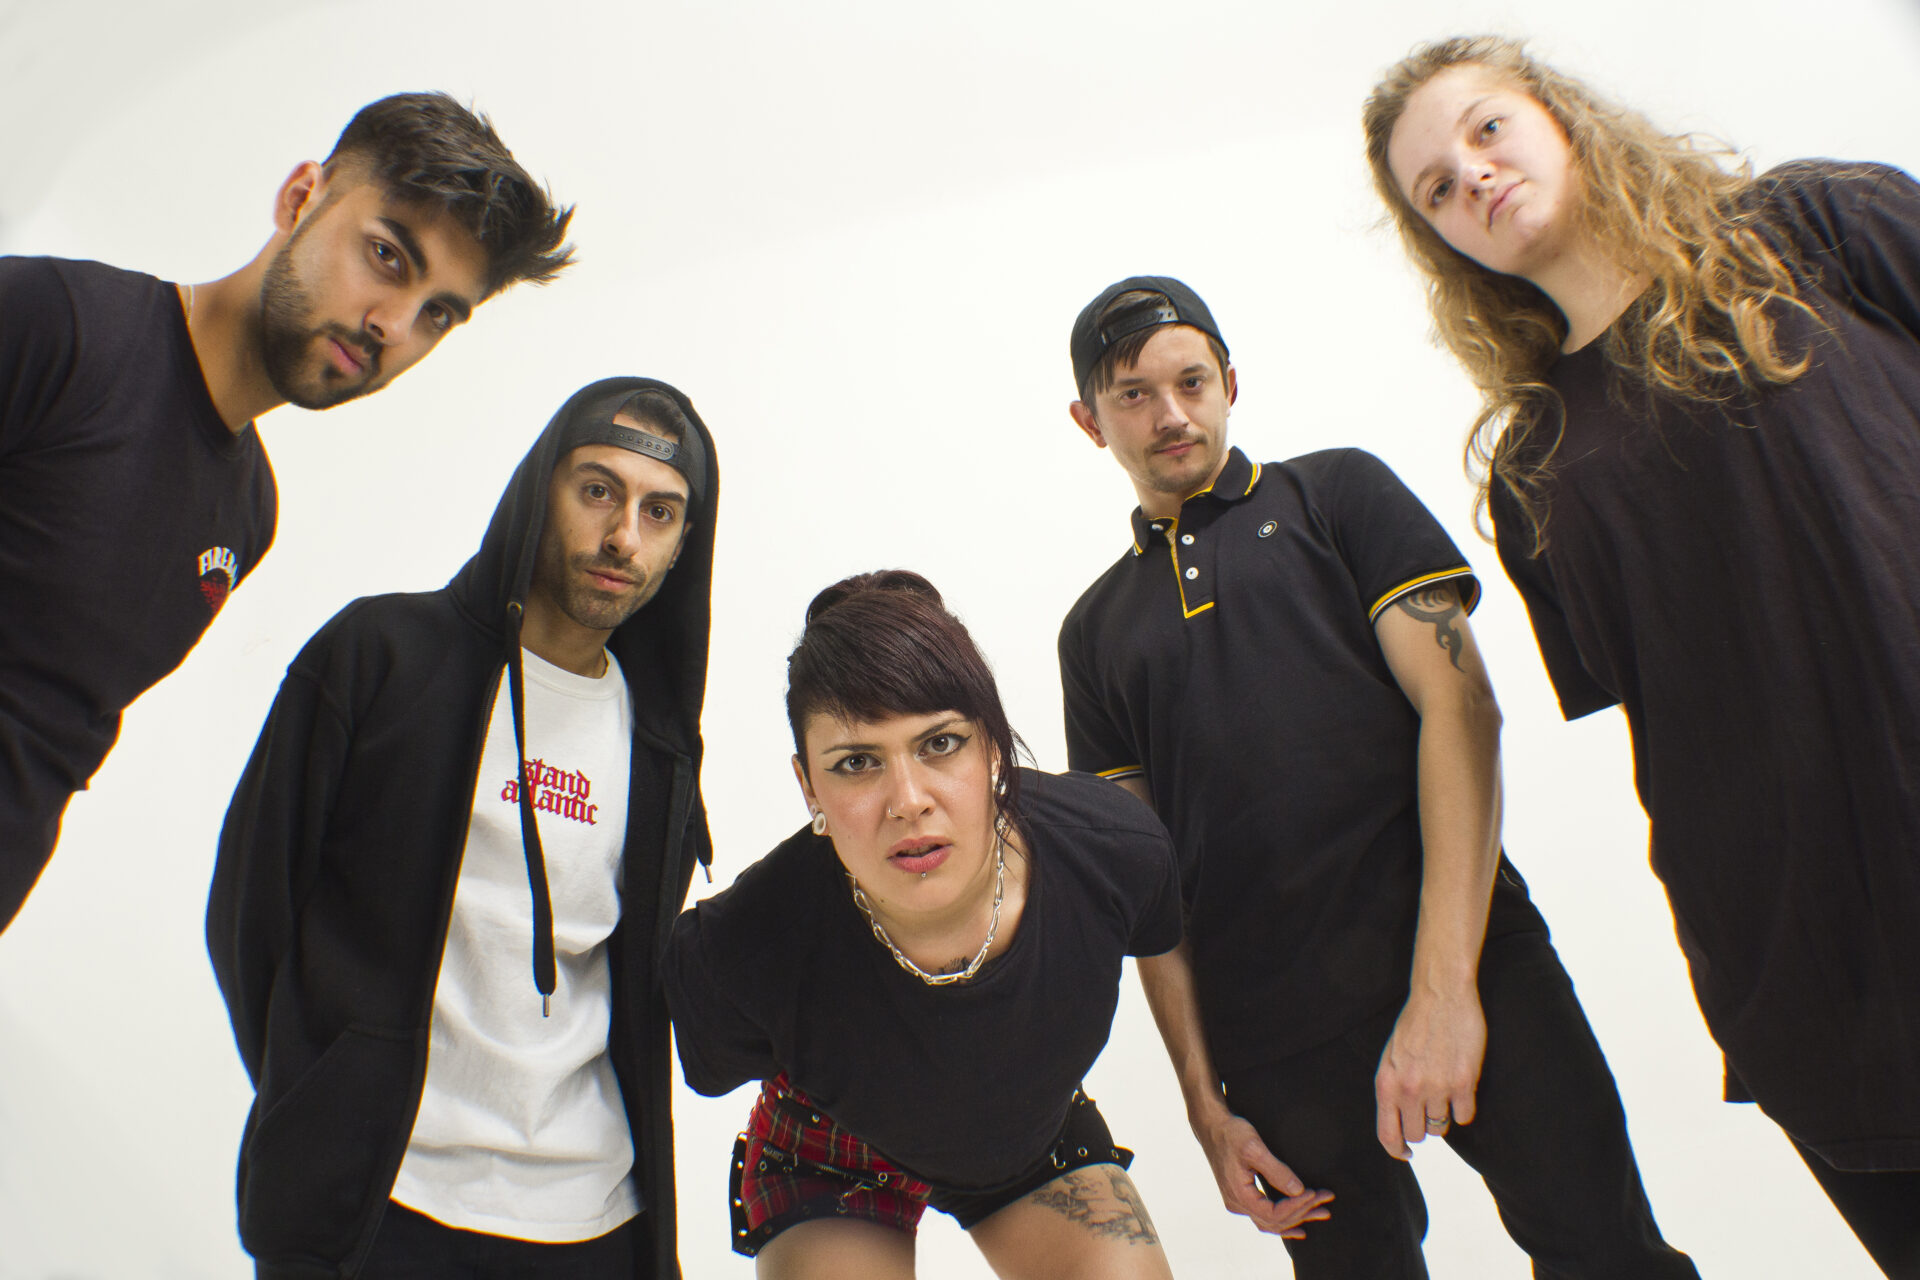 Norwich and London based band Millie Manders & the Shutup